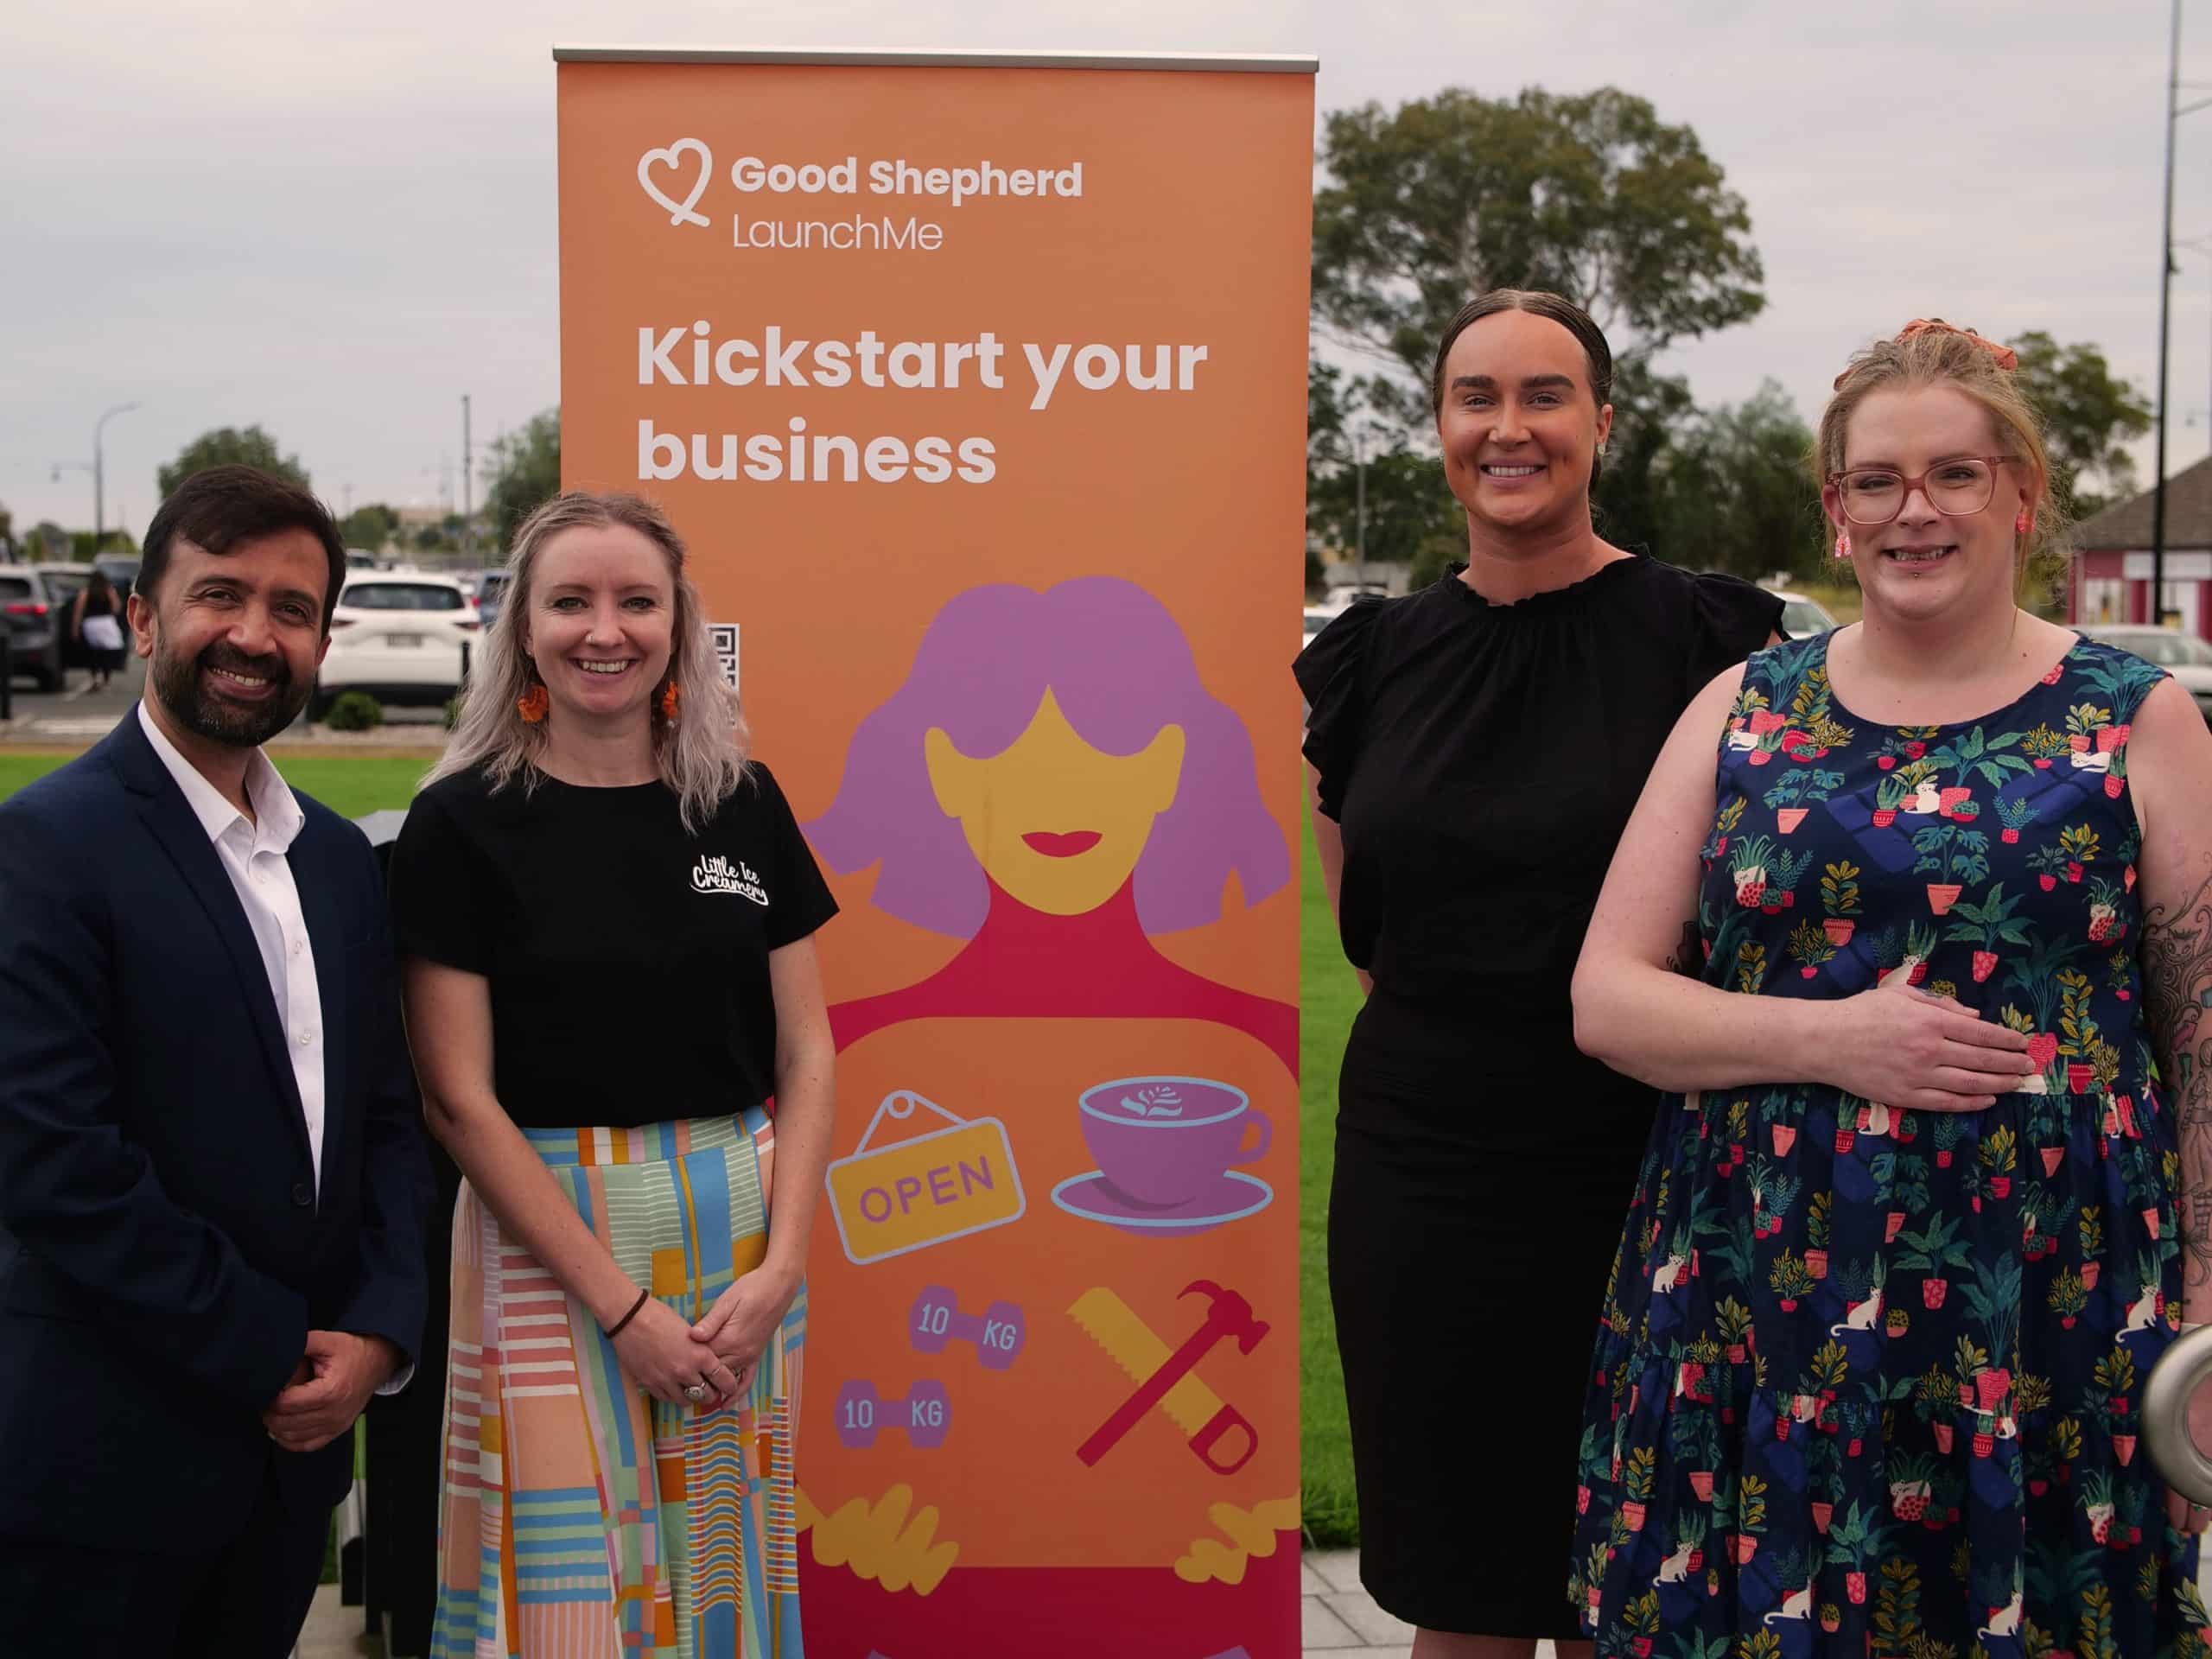 Left to right; a man in a suit standing next to three women in front of an orange sign which says Kickstart your business